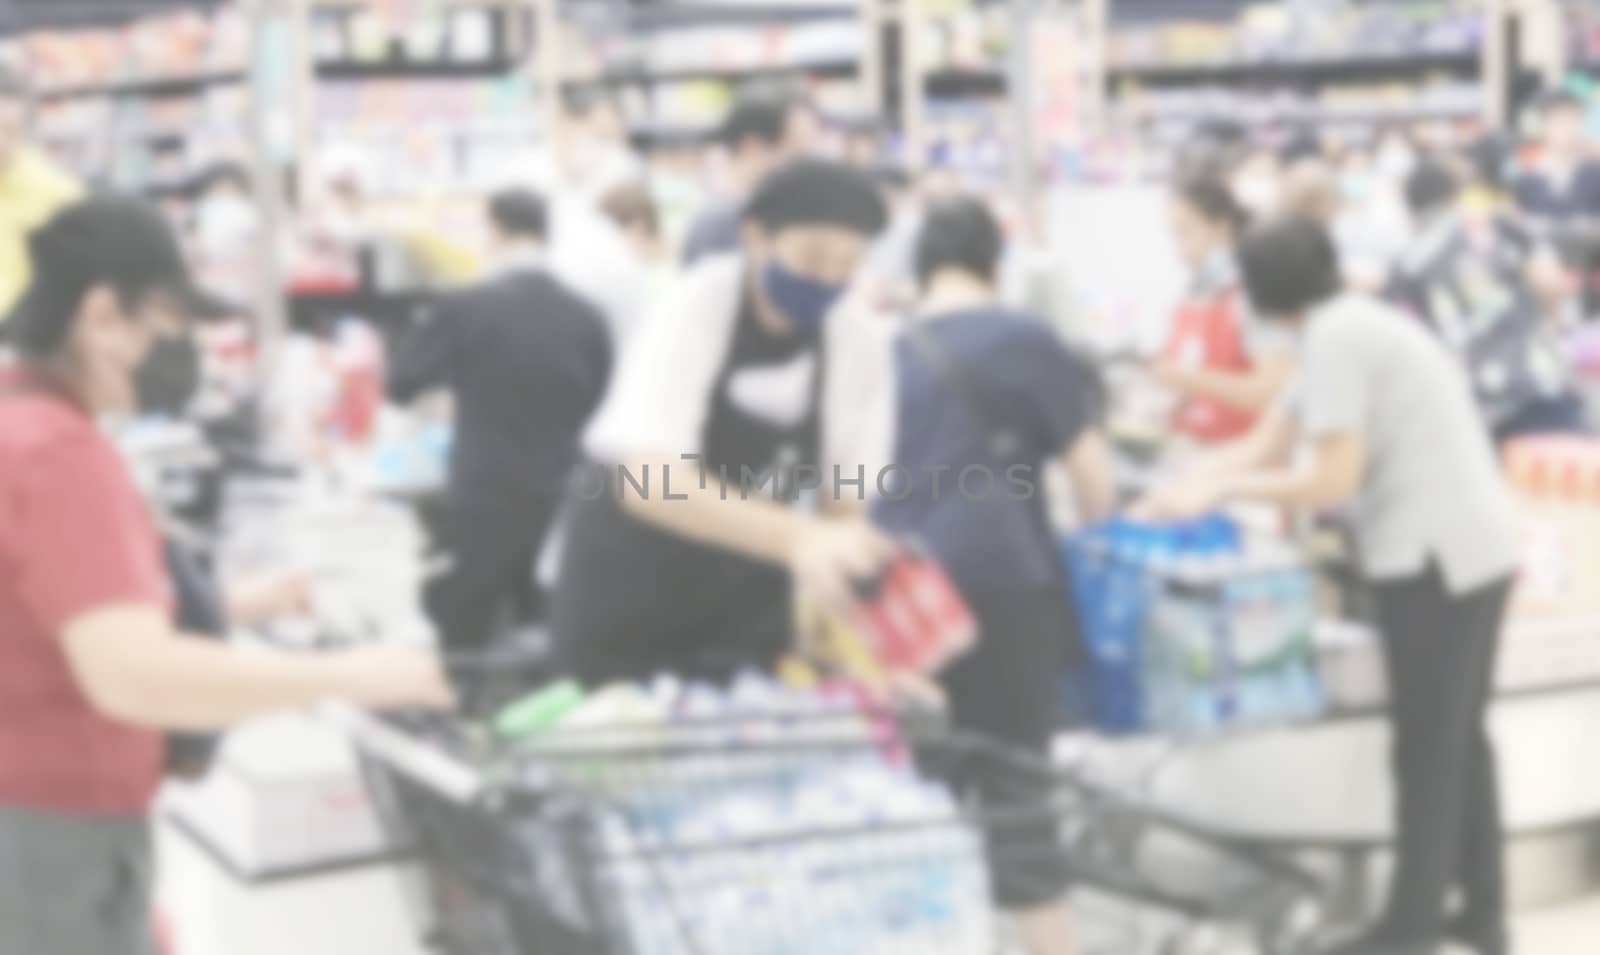 Abstract blurred background of people buying food in the superma by Myimagine